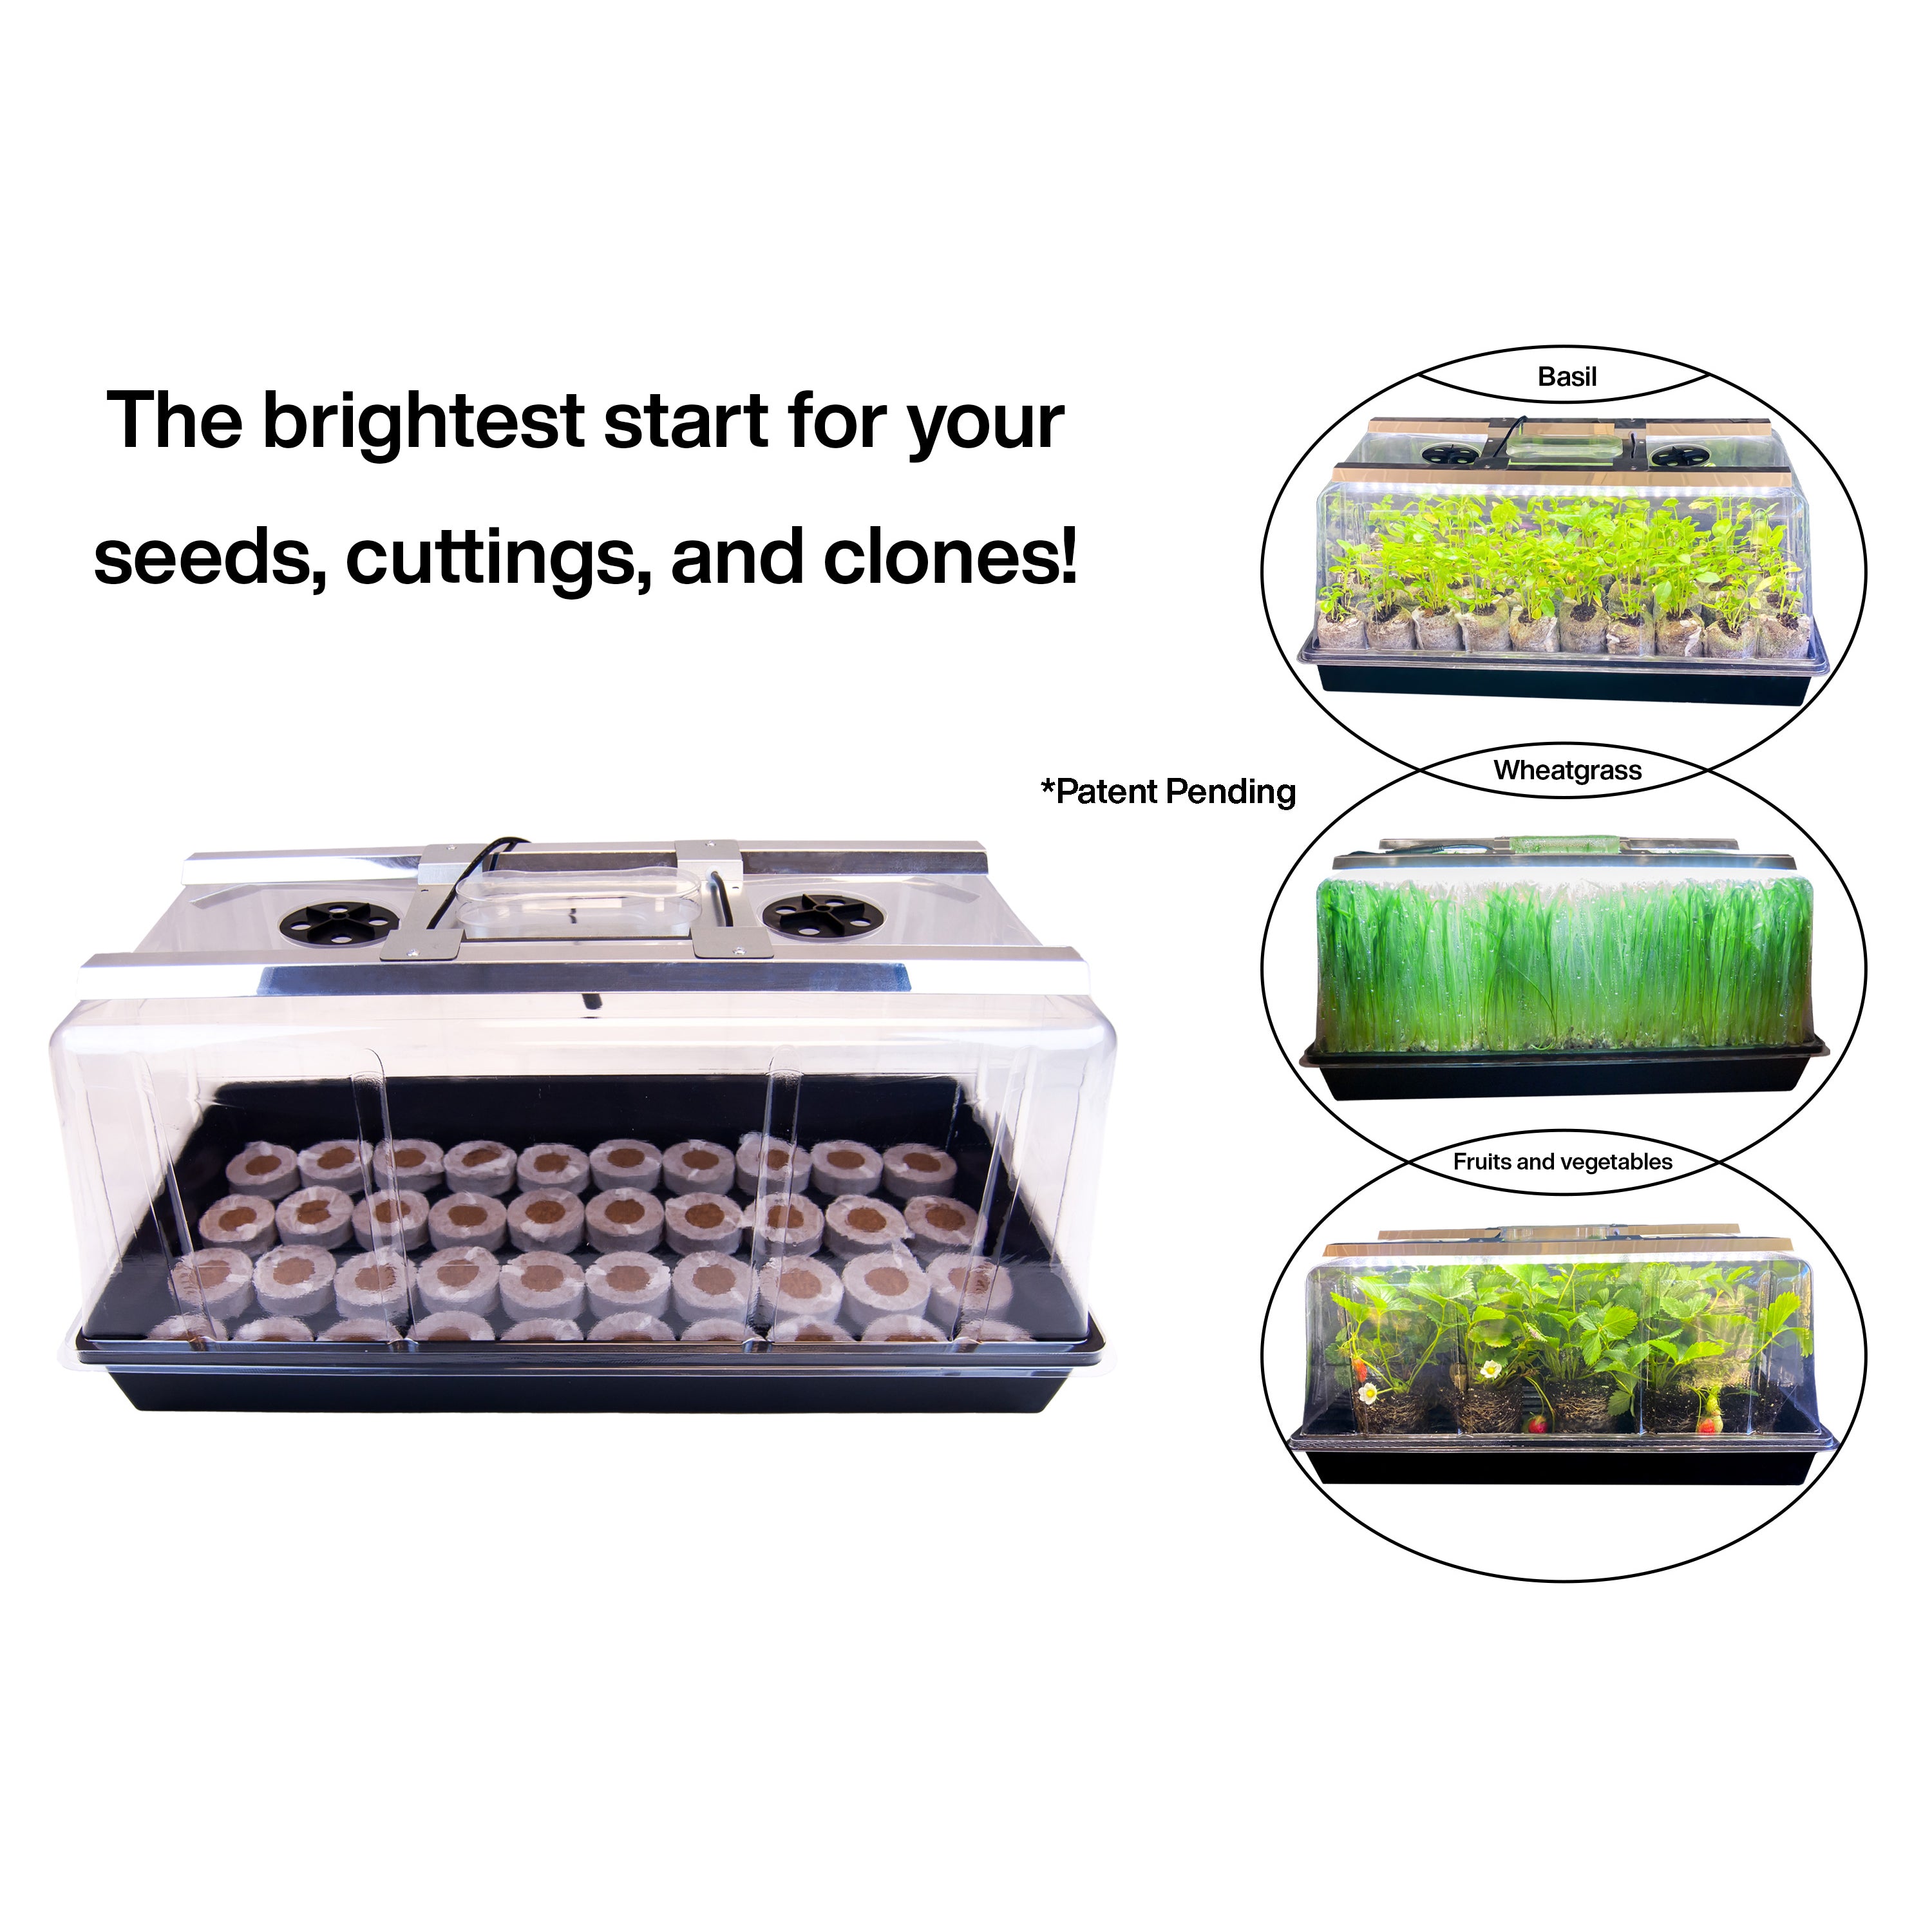 Seedling Station Kit with LED Grow Light, Propagation Dome, Tray and 50 Coir Seedling Starters (case of 5 units)